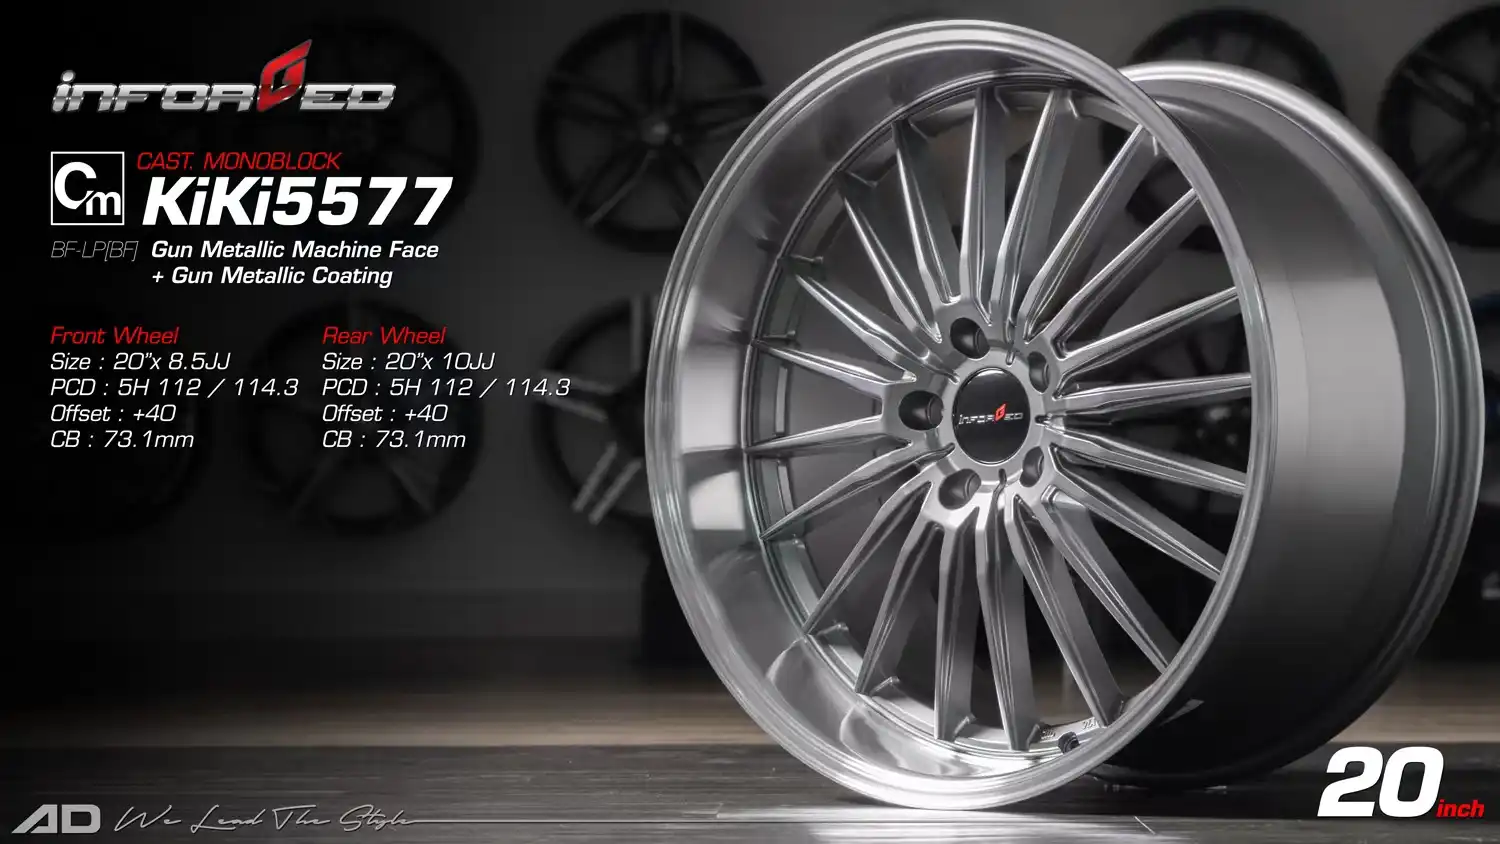 Ad wheels | Inforged 5579 20 inch 5H112/114.3